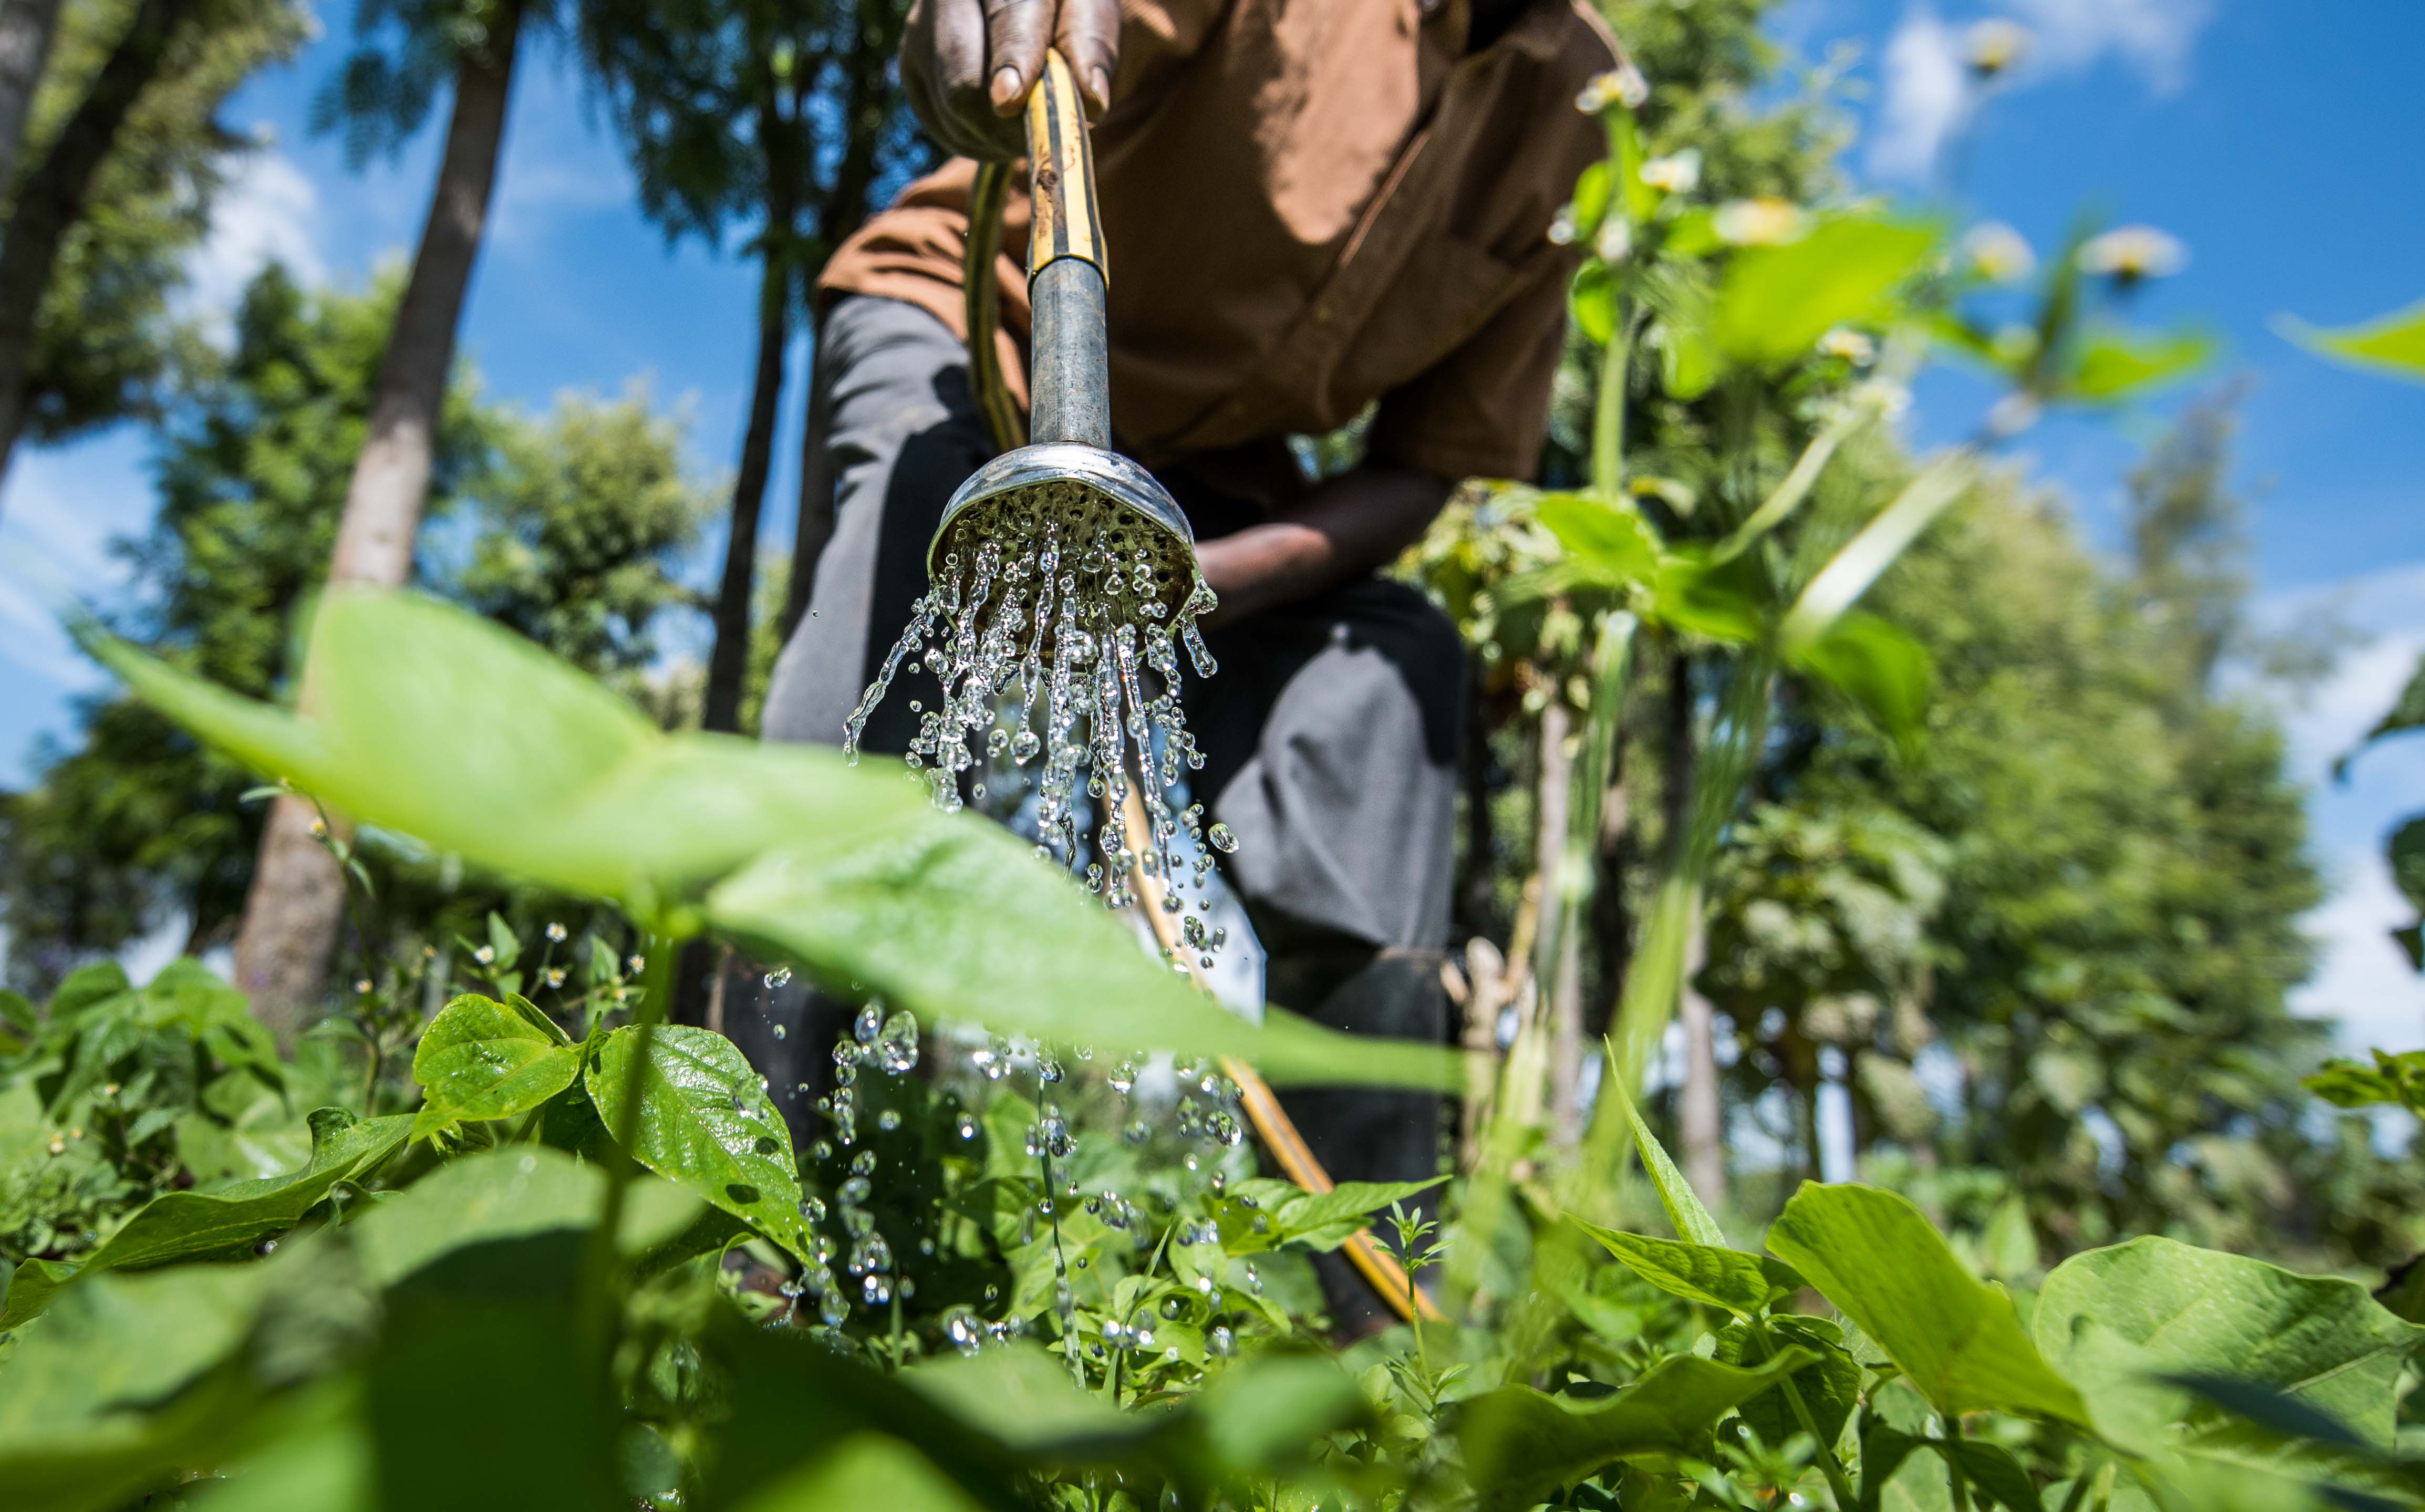 Man watering plant with hose 